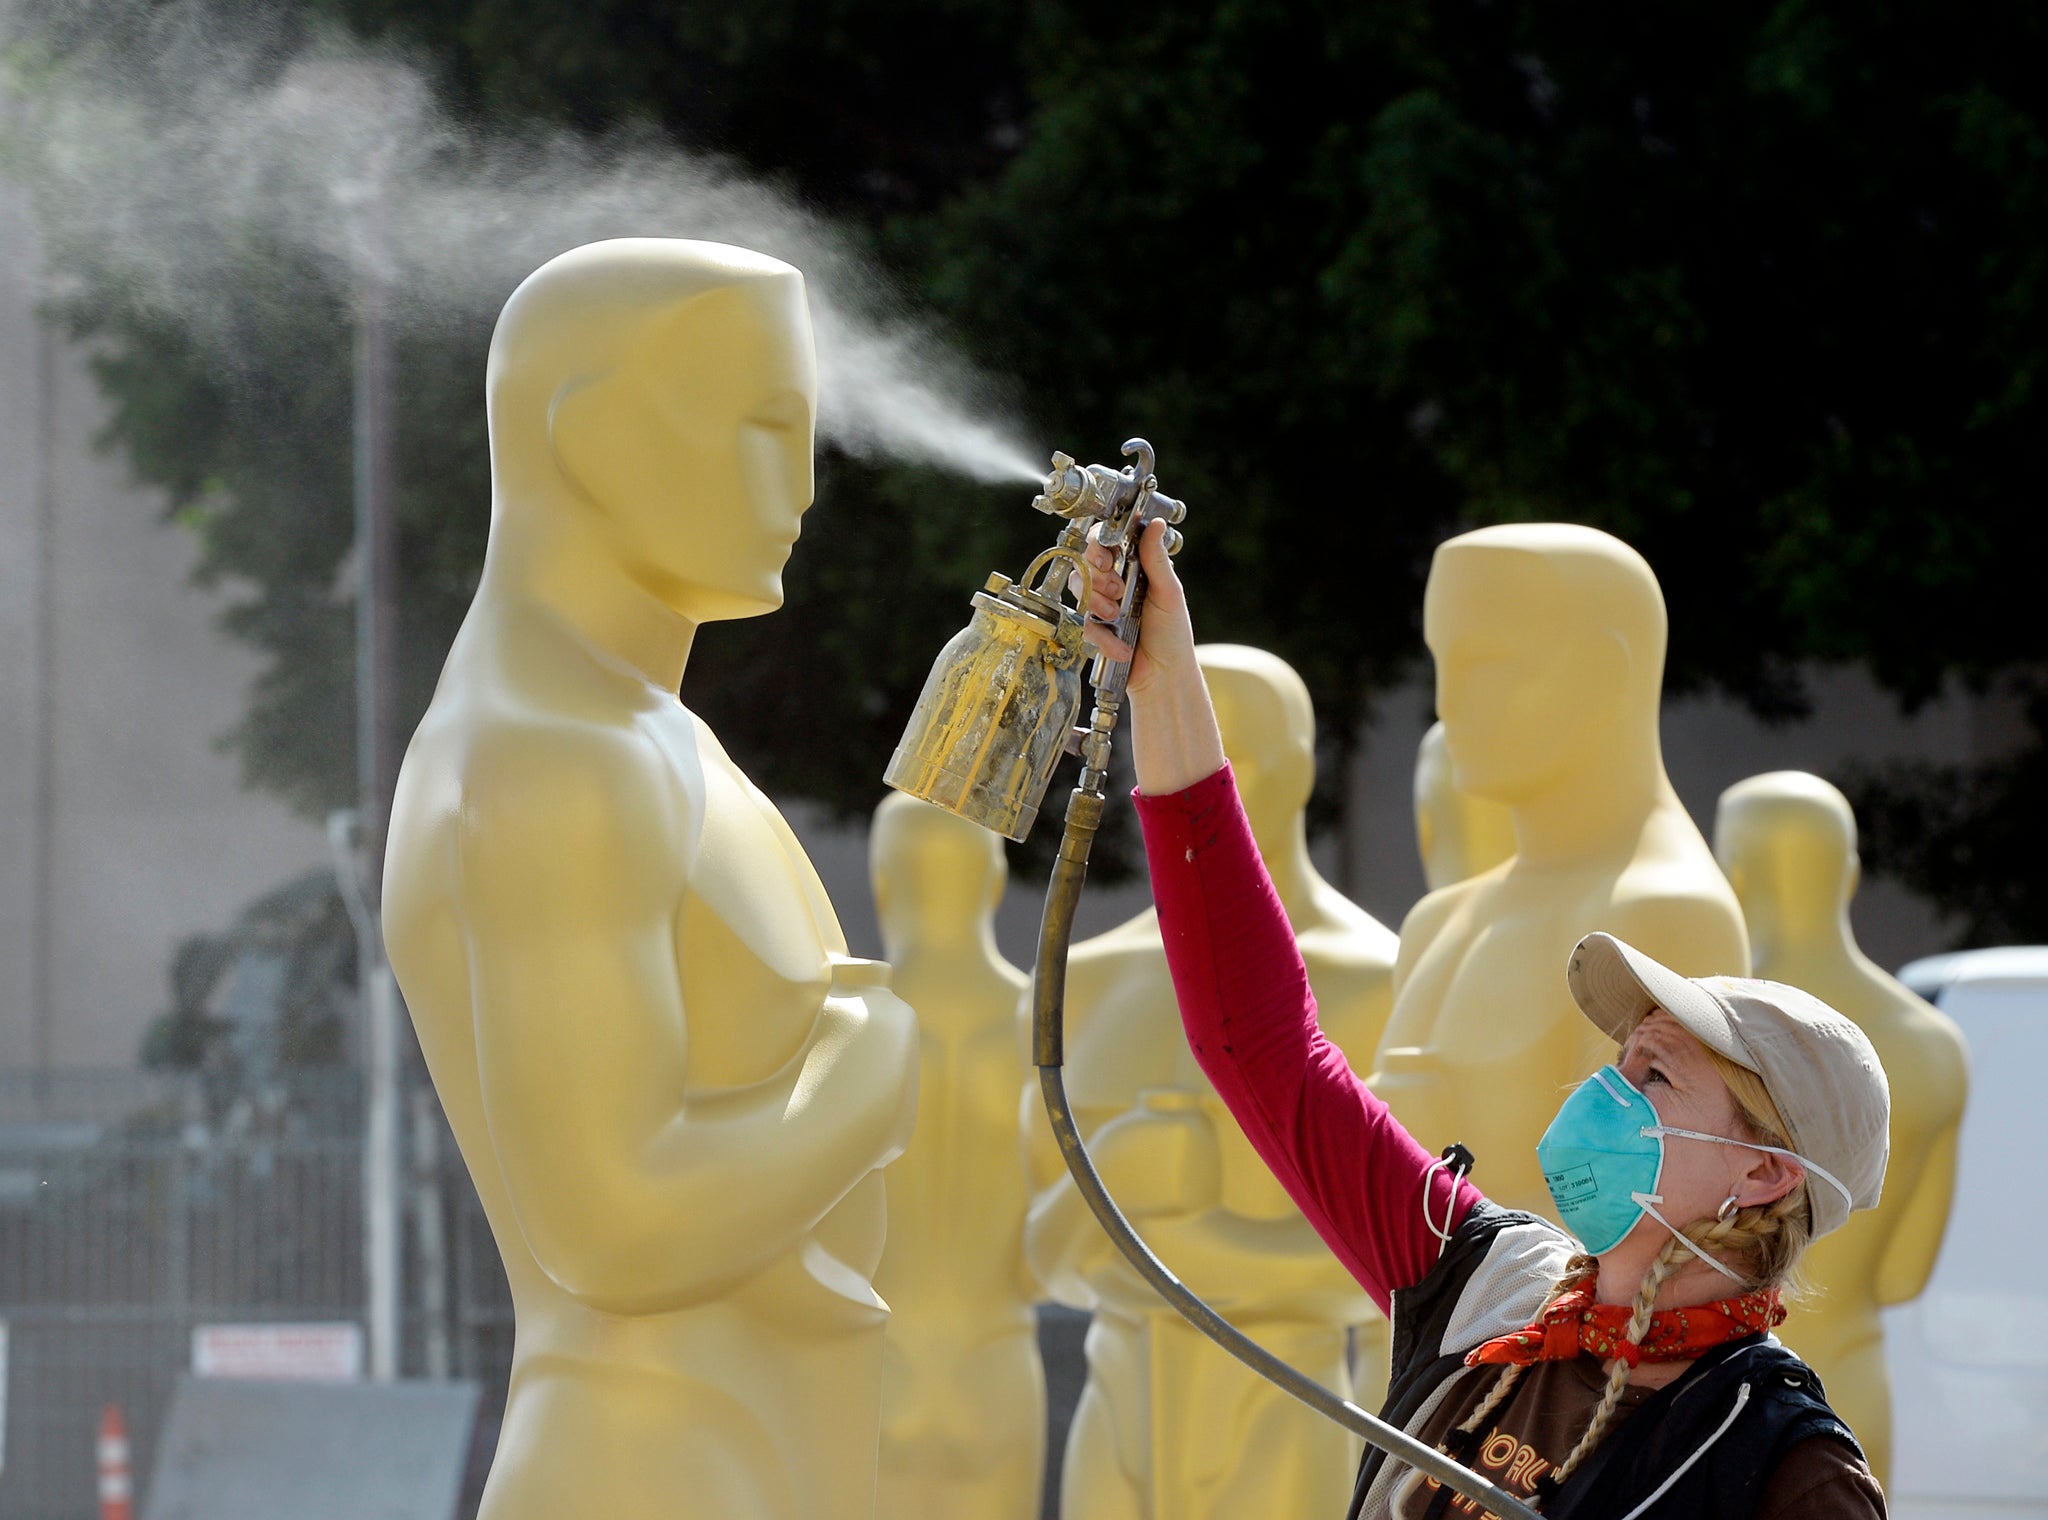 Dena D'Angelo spray paints an Oscar statue with gold during preparation of 87th Annual Academy Awards at Dolby Theater